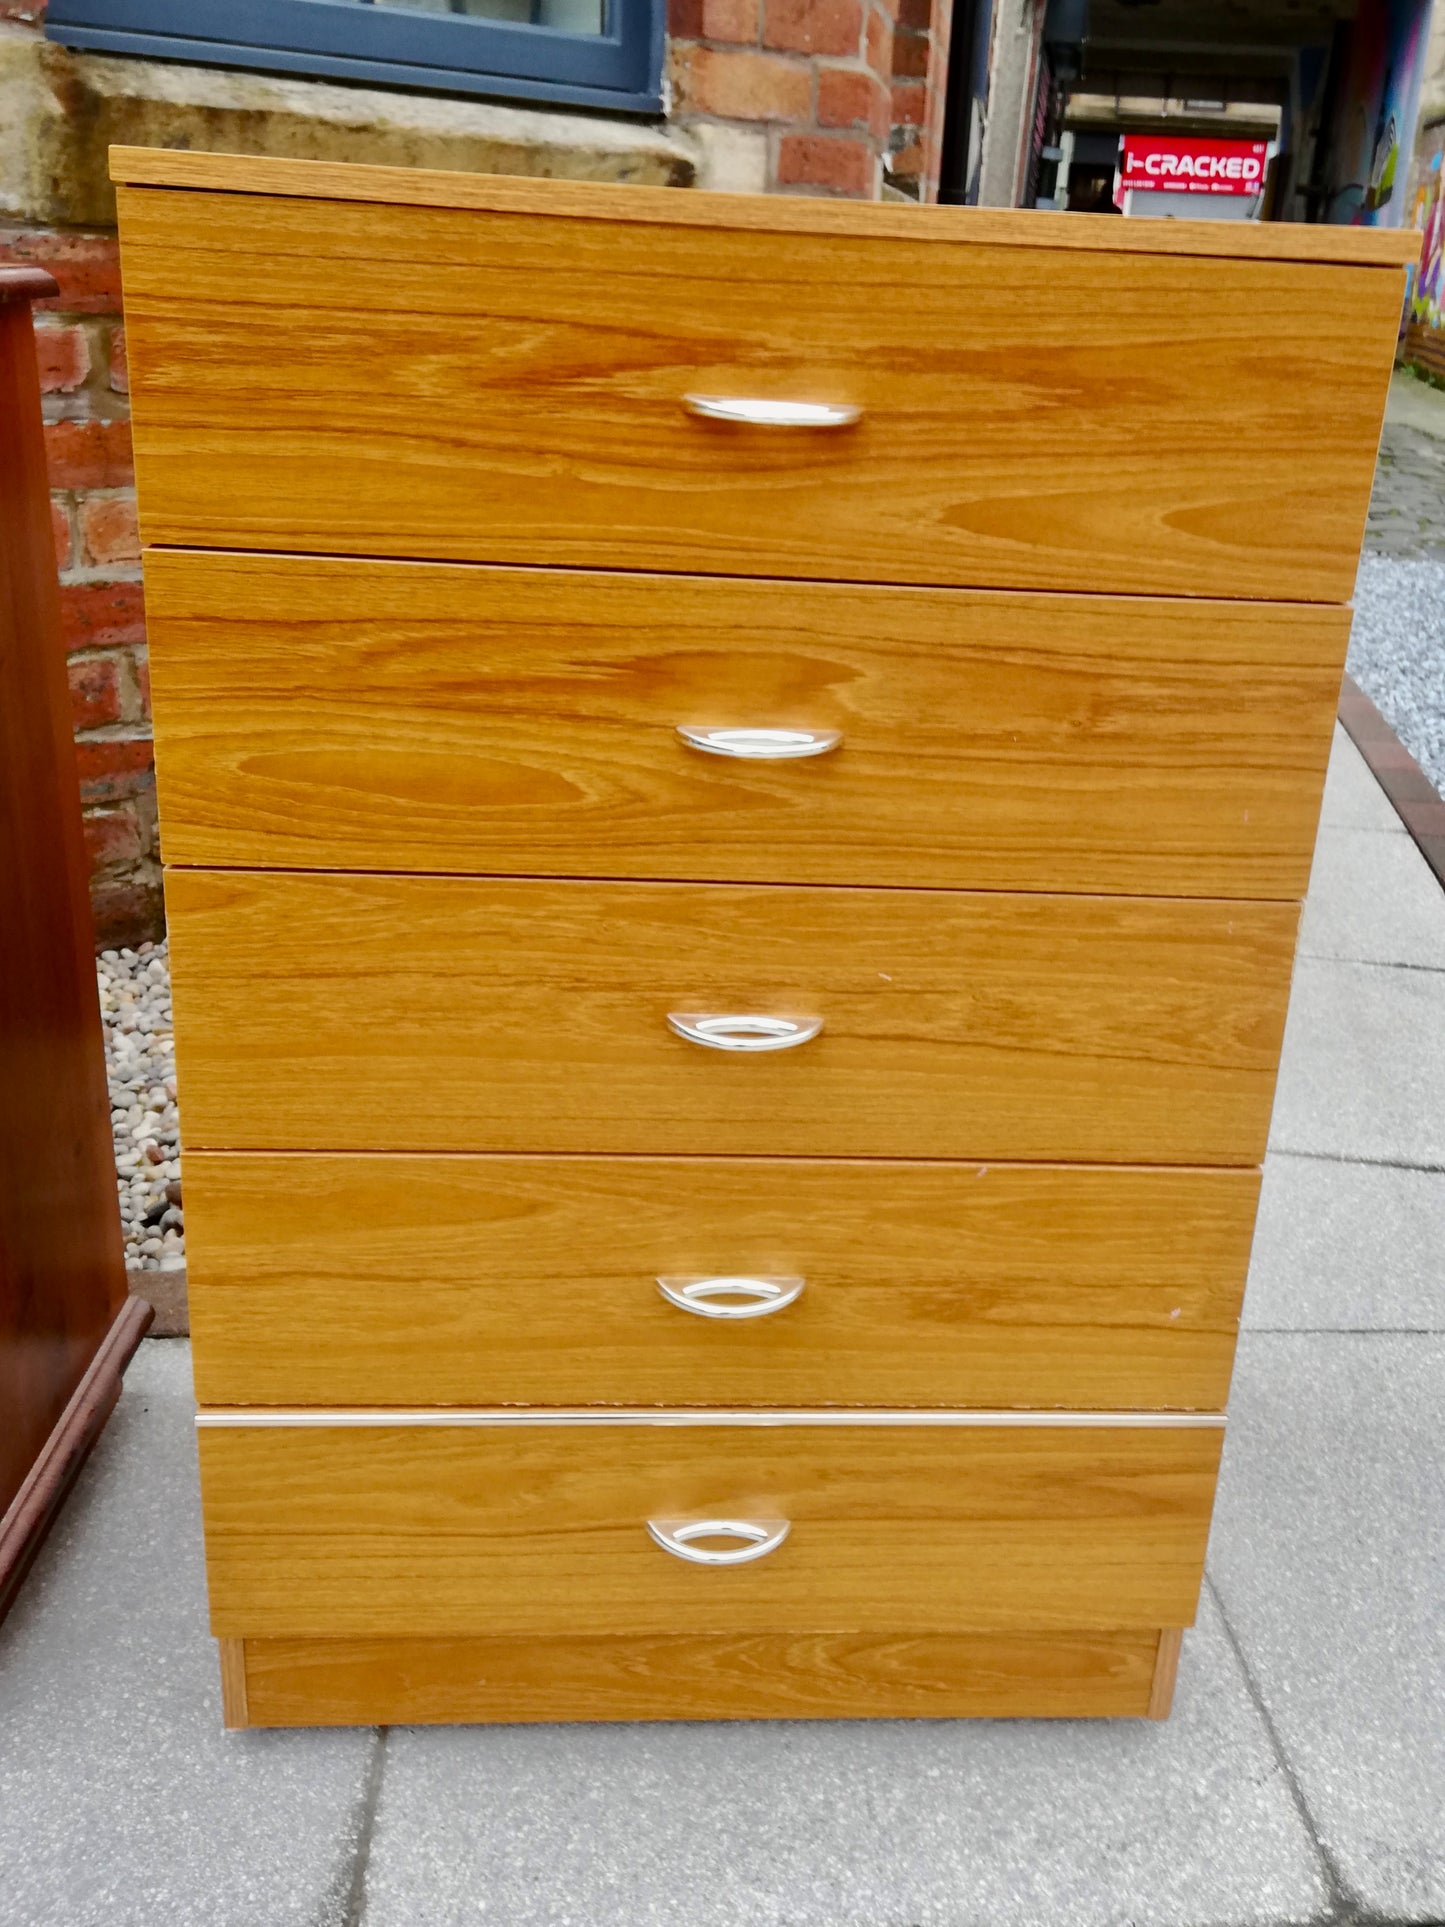 Vintage mid century chest of drawers available for painting - price includes painting